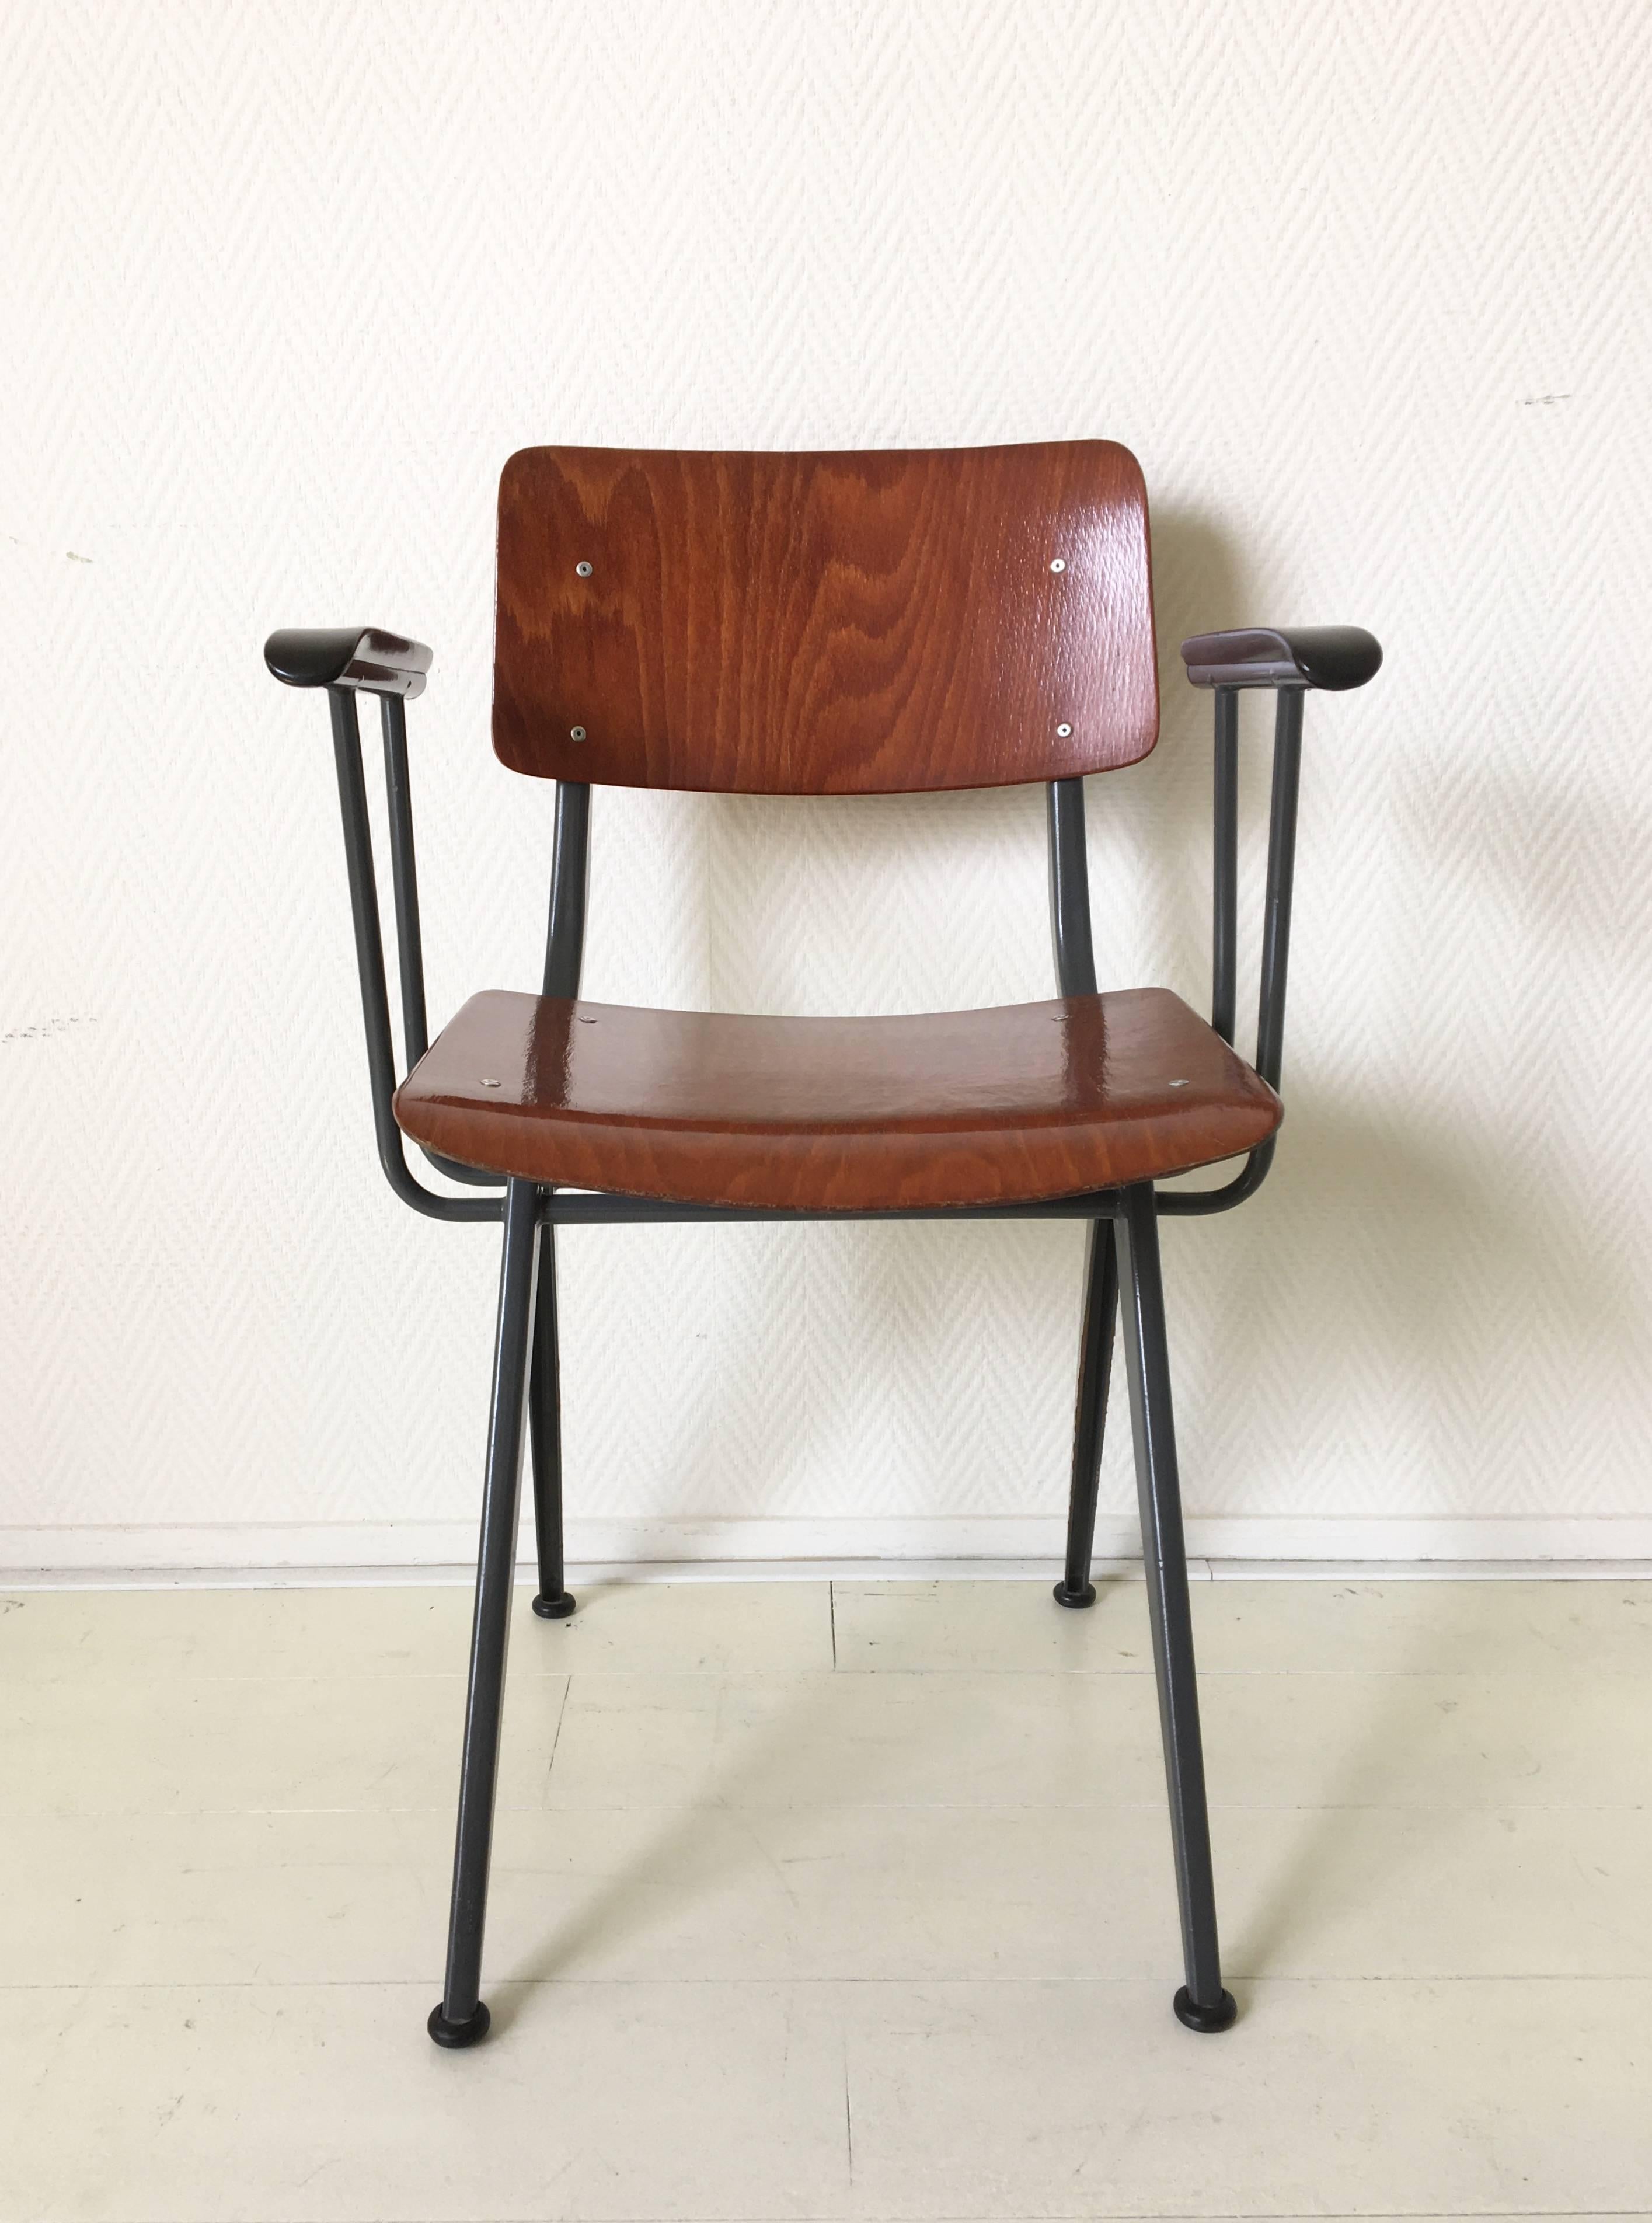 Stunning Minimalist design with an anthracite metal sheet base and Pagwood seat and backrest. The chair also features nice Bakelite armrests. Most likely manufactured by Marko. However this is a 1950s-1960s design, the chair remains in excellent